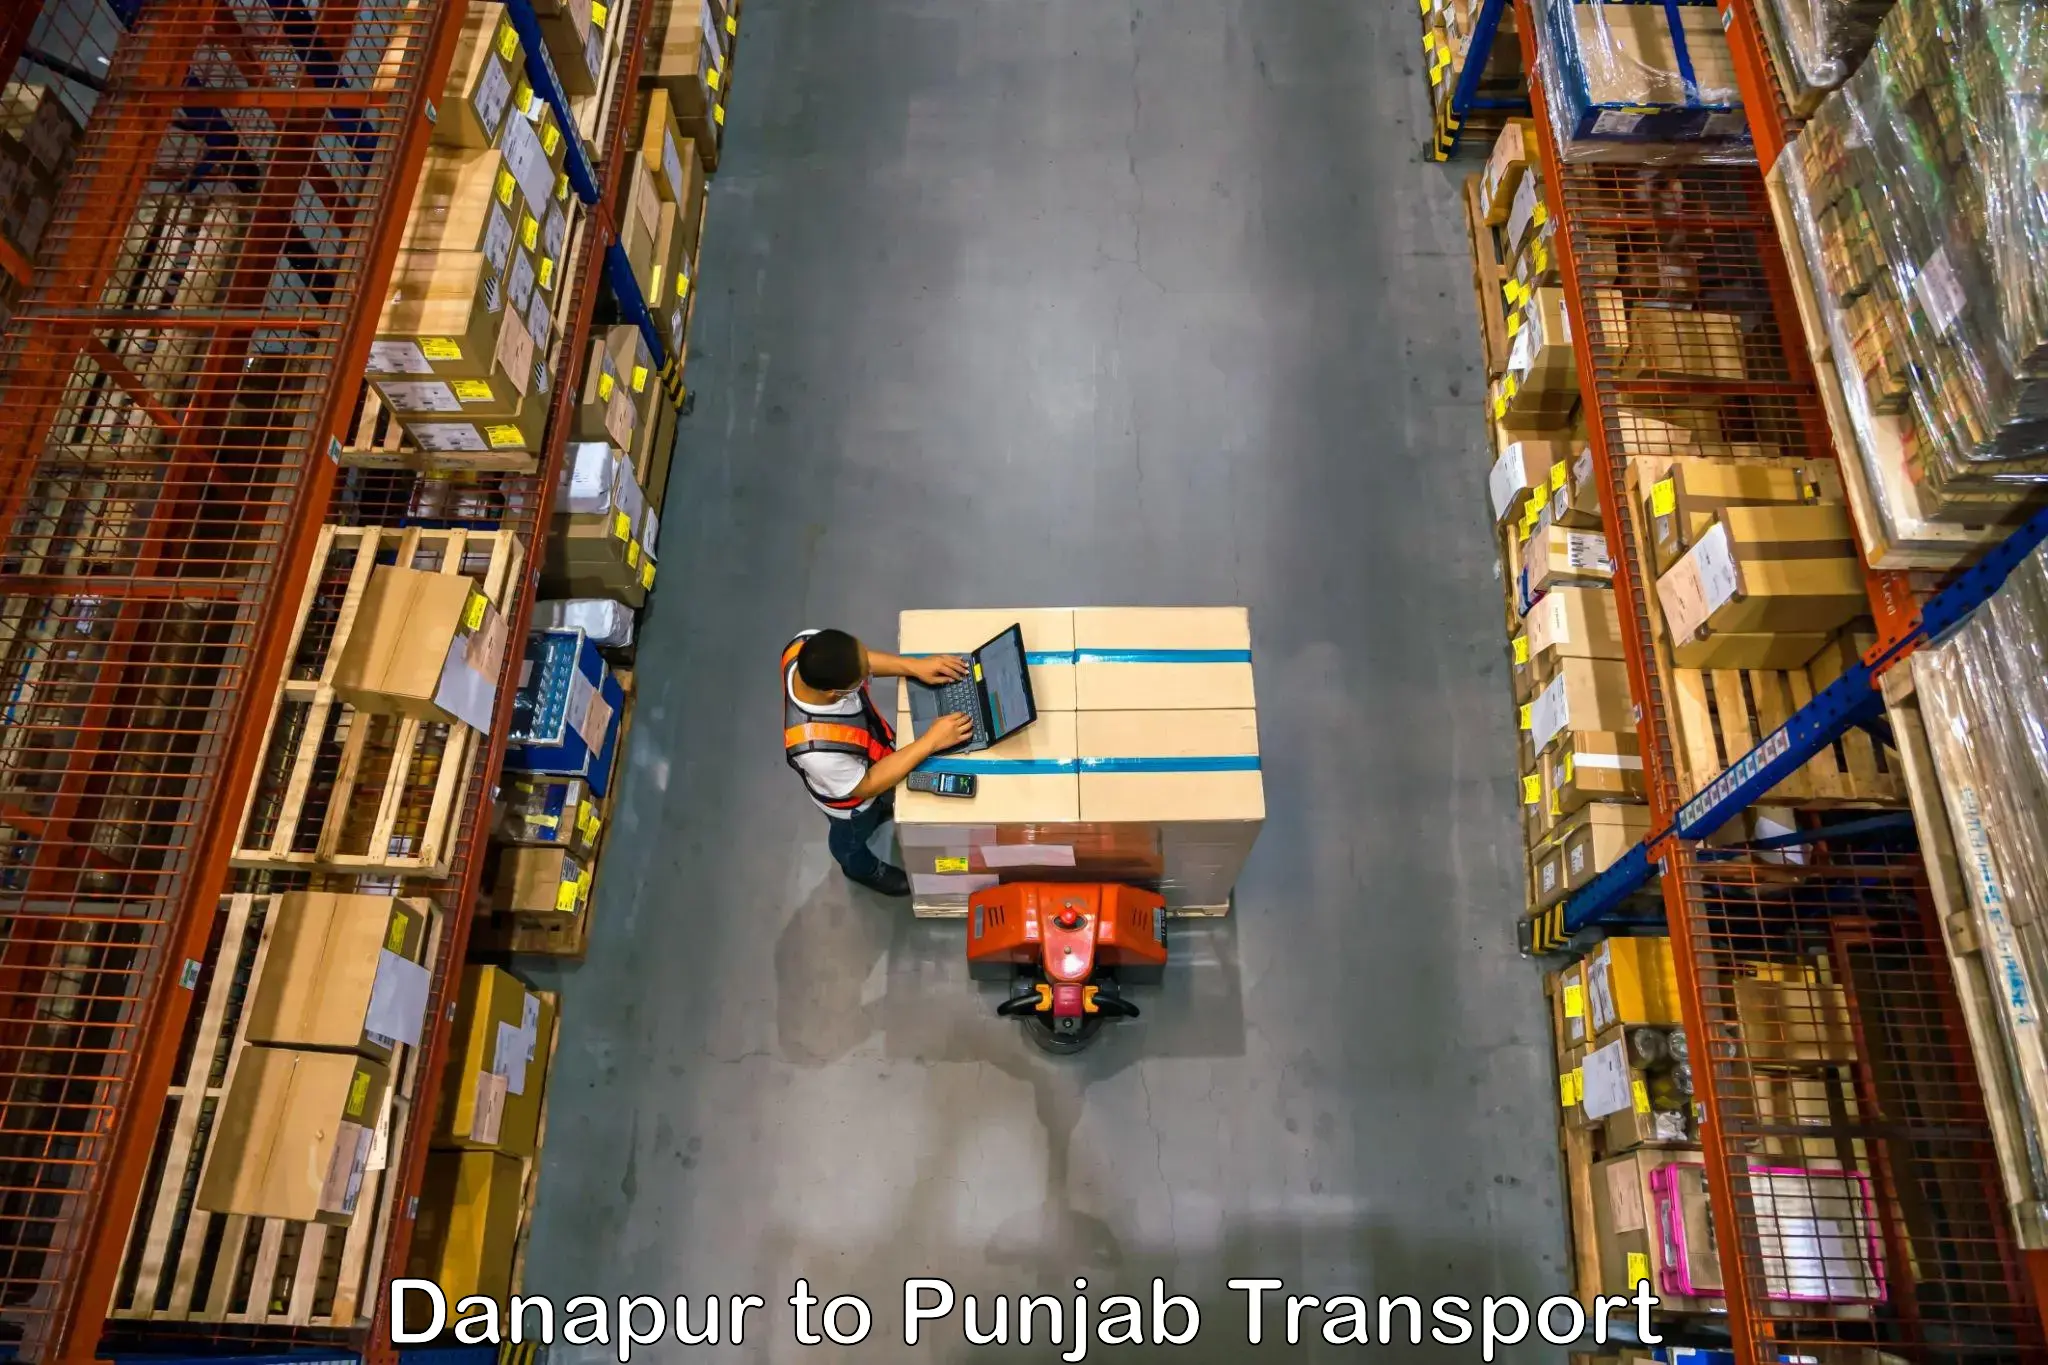 Transport bike from one state to another Danapur to Bathinda